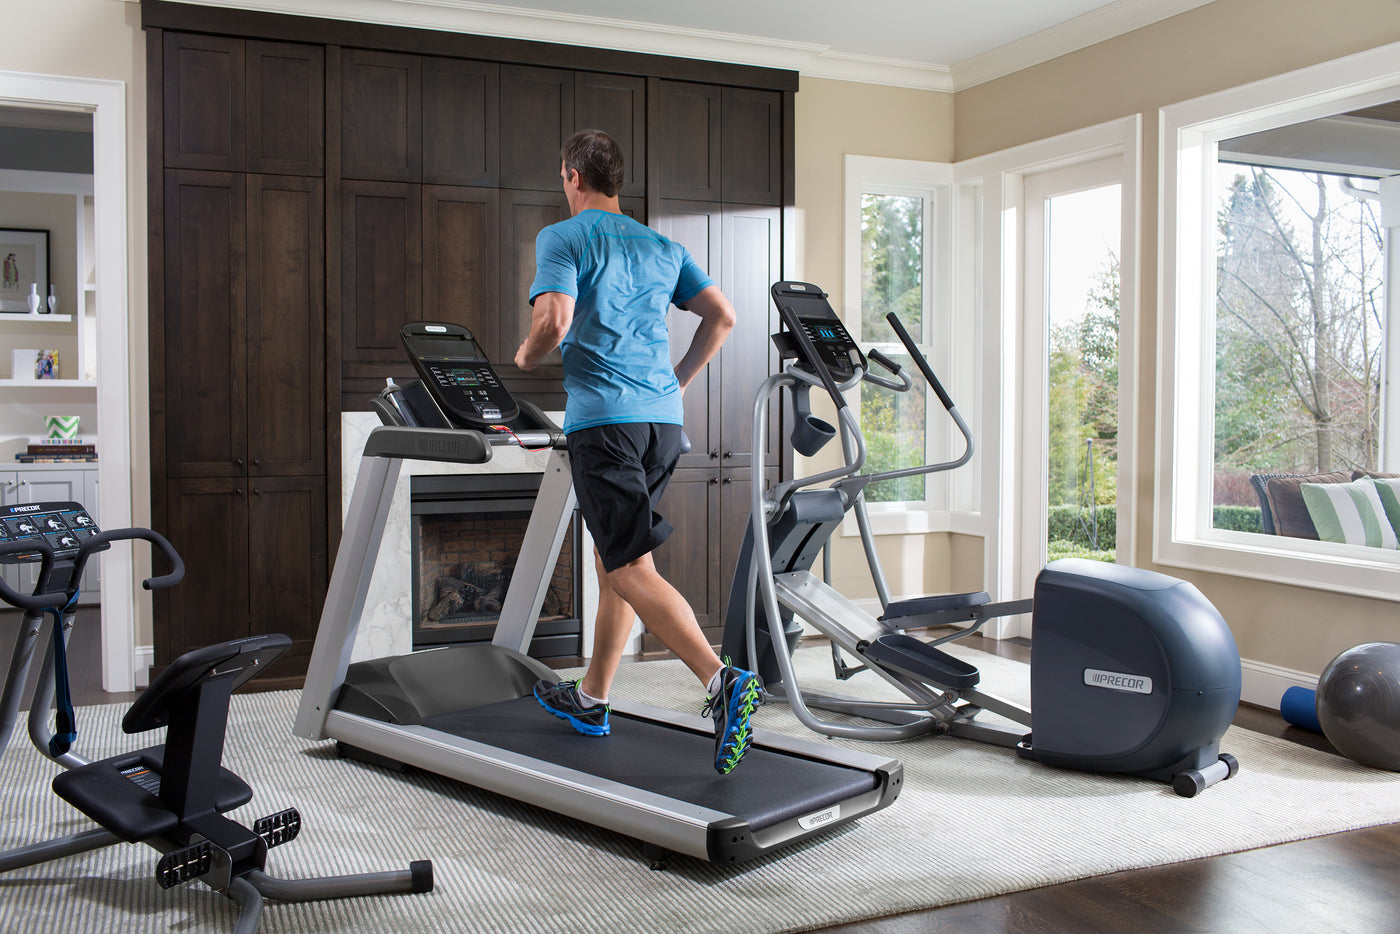 Man running on his Precor TRM 445 treadmill in his home gym that also includes EFX 447 elliptical fitness crosstrainer, and 240i StretchTrainer